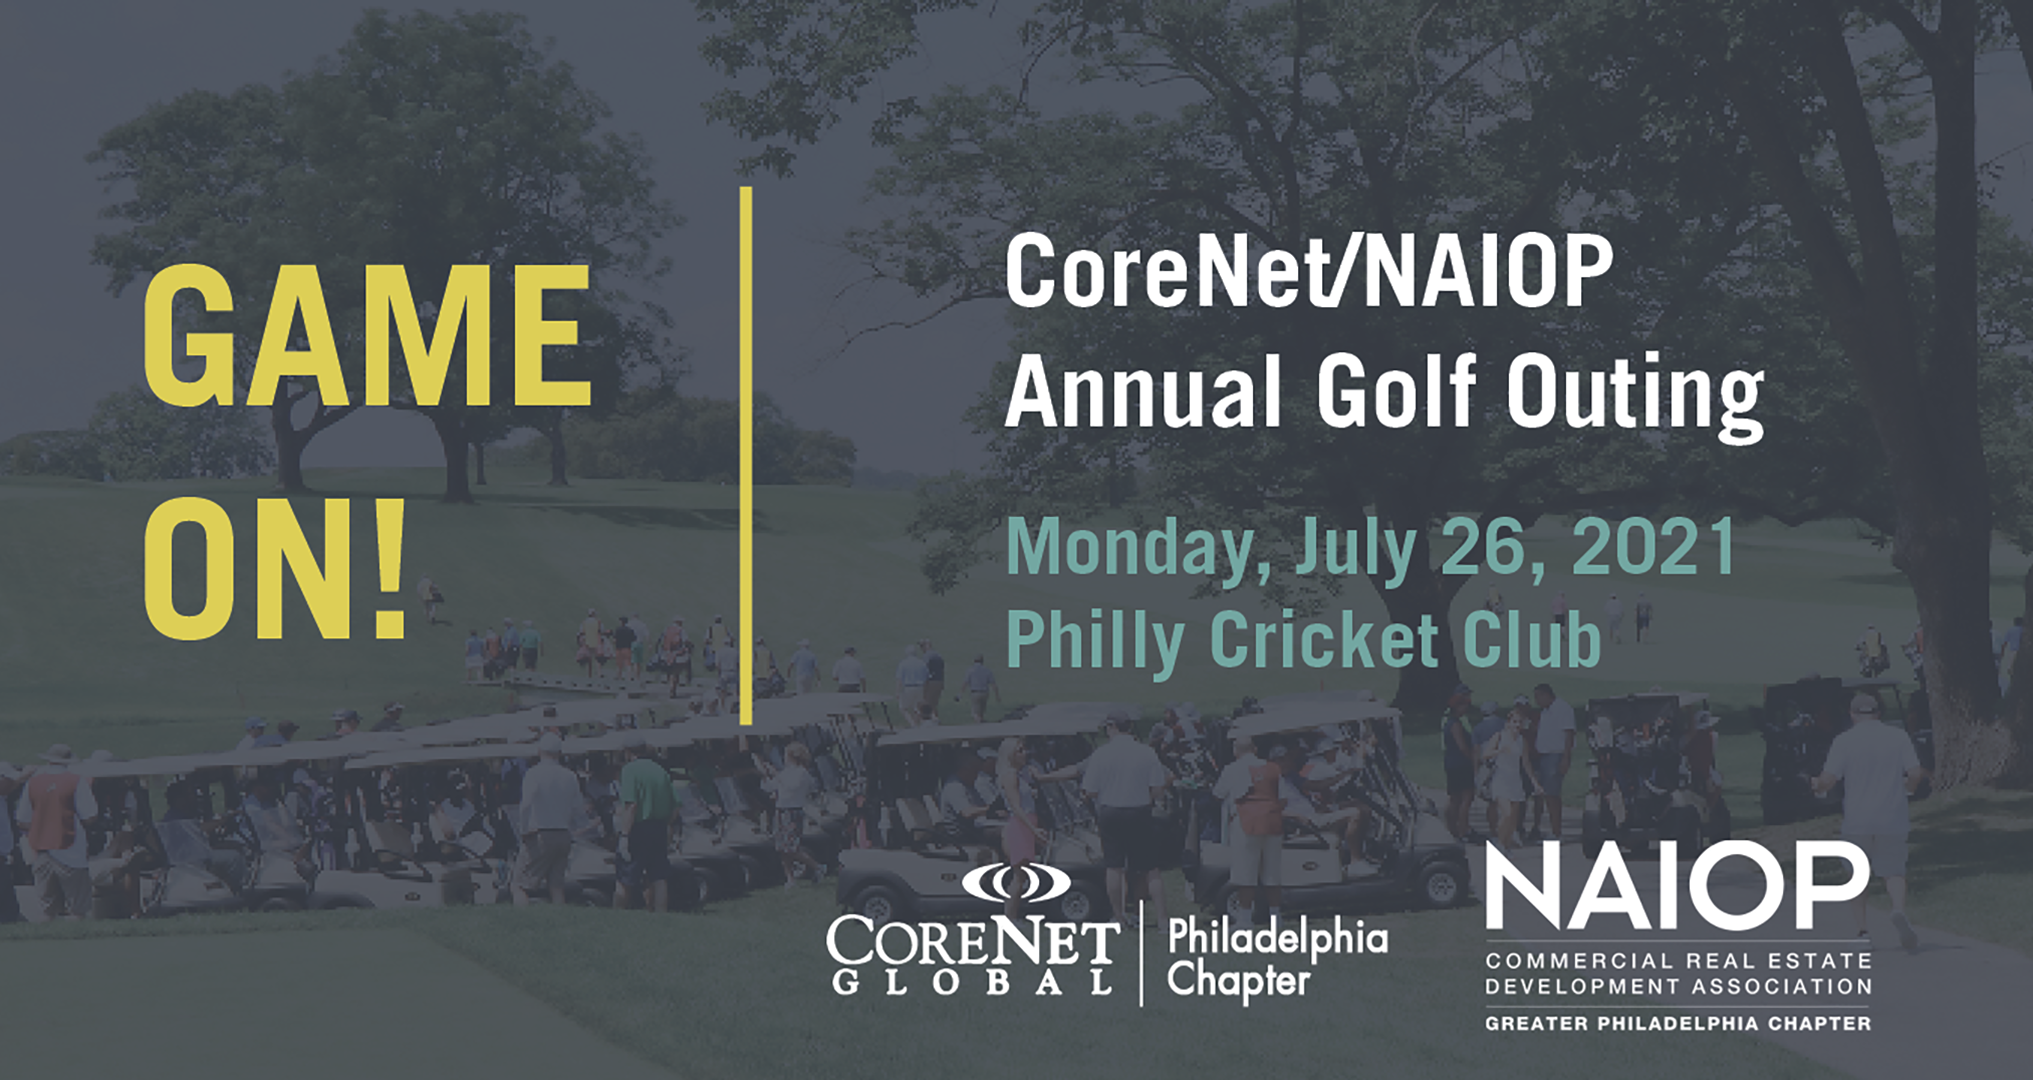 CoreNet/NAIOP Annual Golf Outing 2021